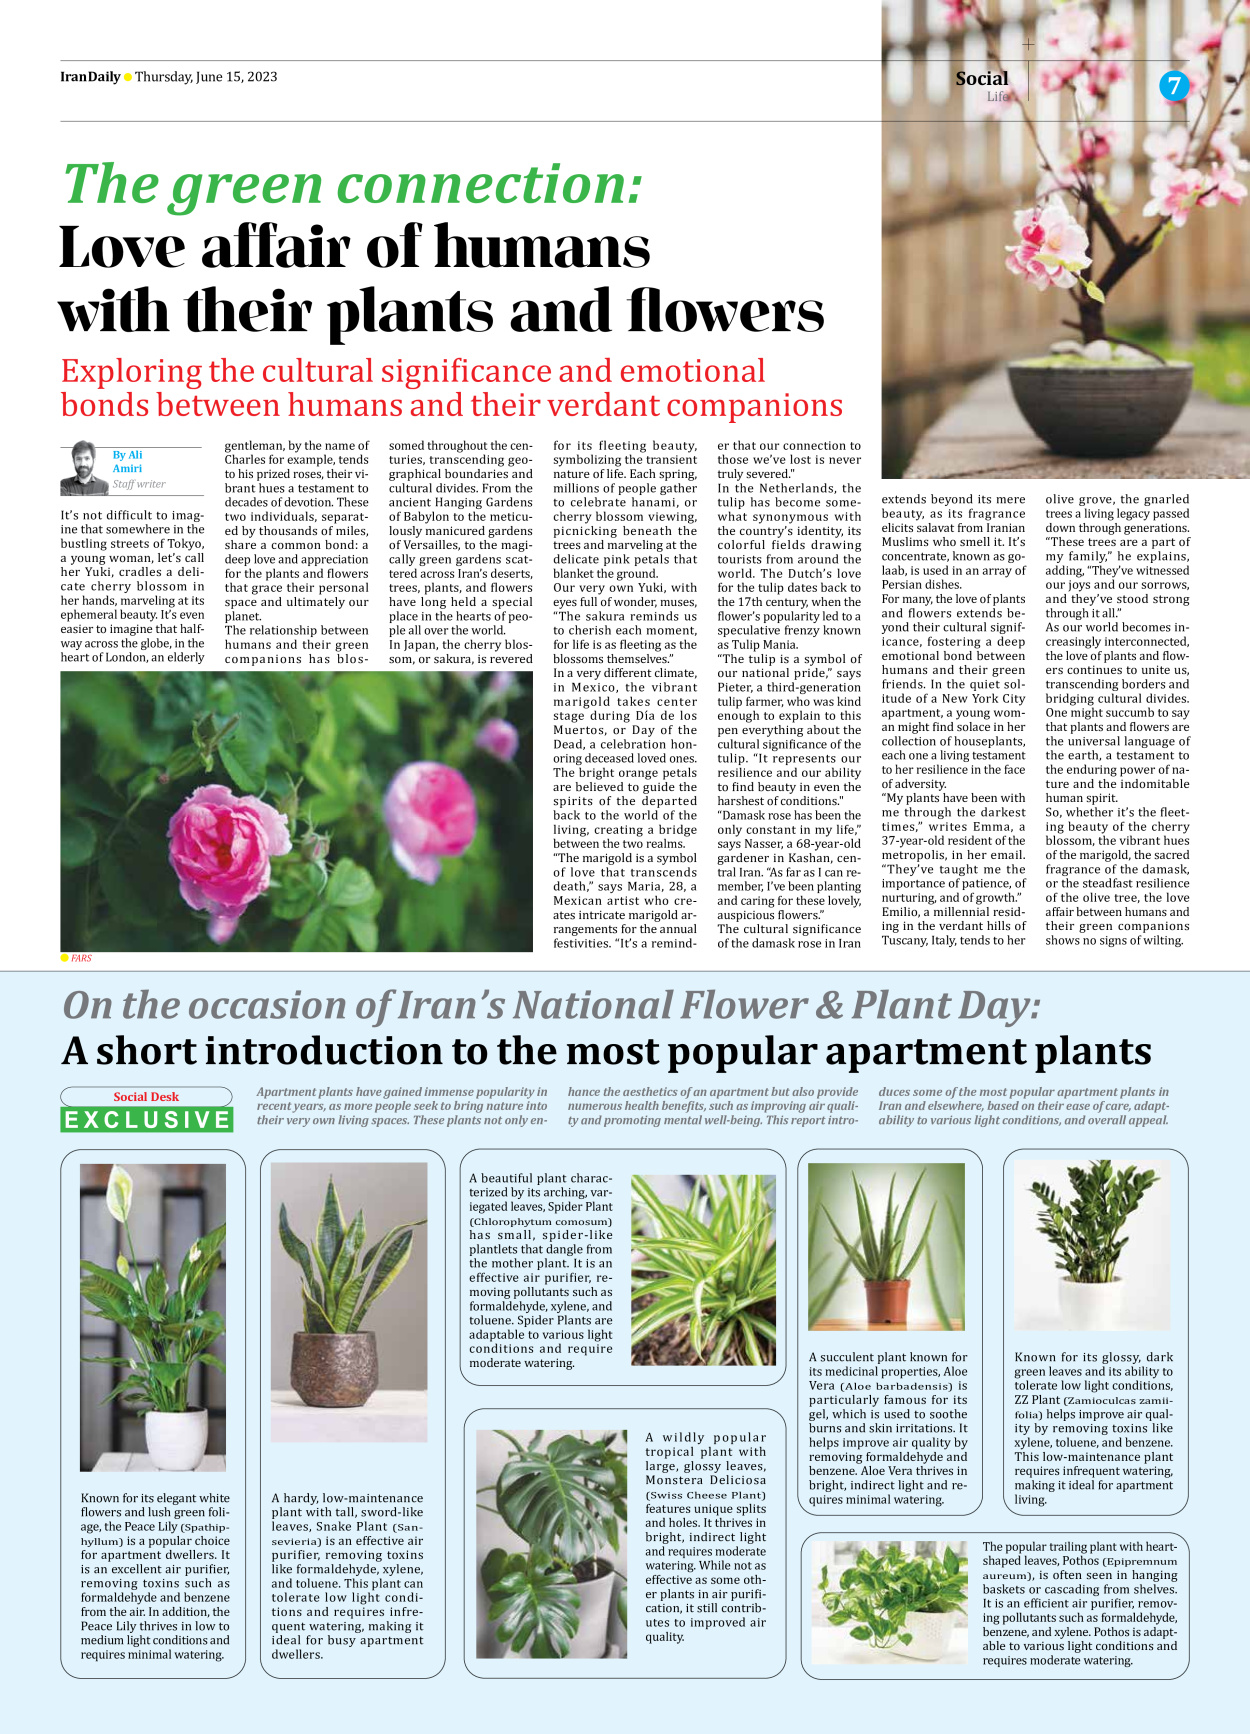 Iran Daily - Number Seven Thousand Three Hundred and Fifteen - 15 June 2023 - Page 7